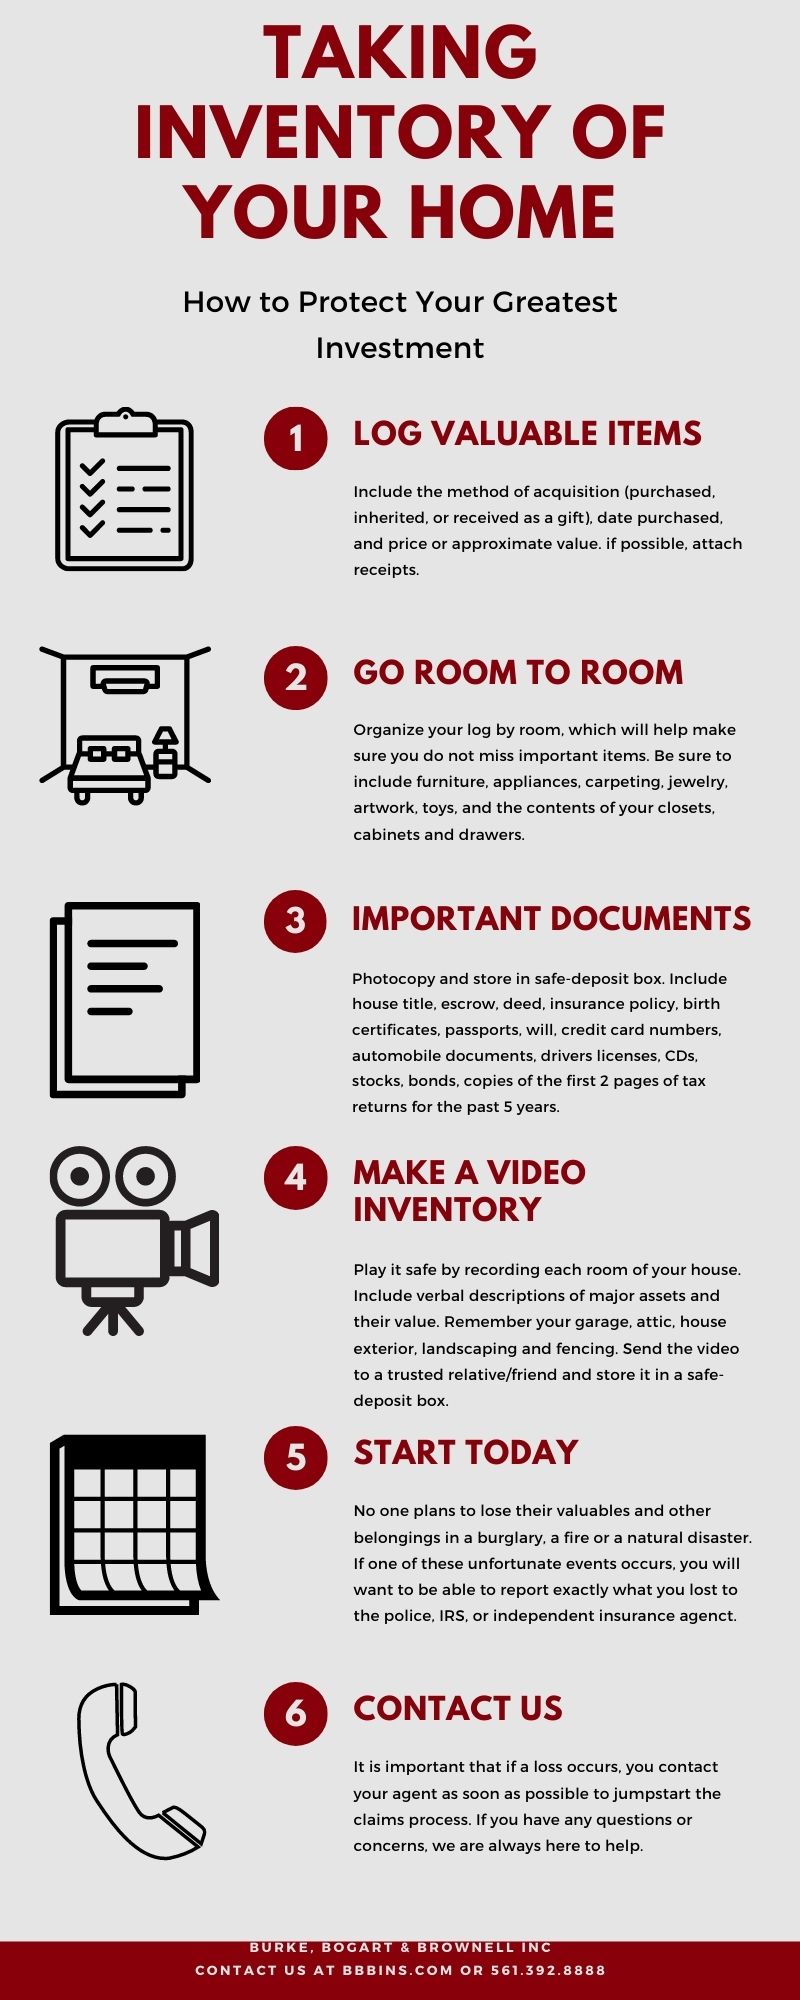 Tips on how to take an inventory of your home